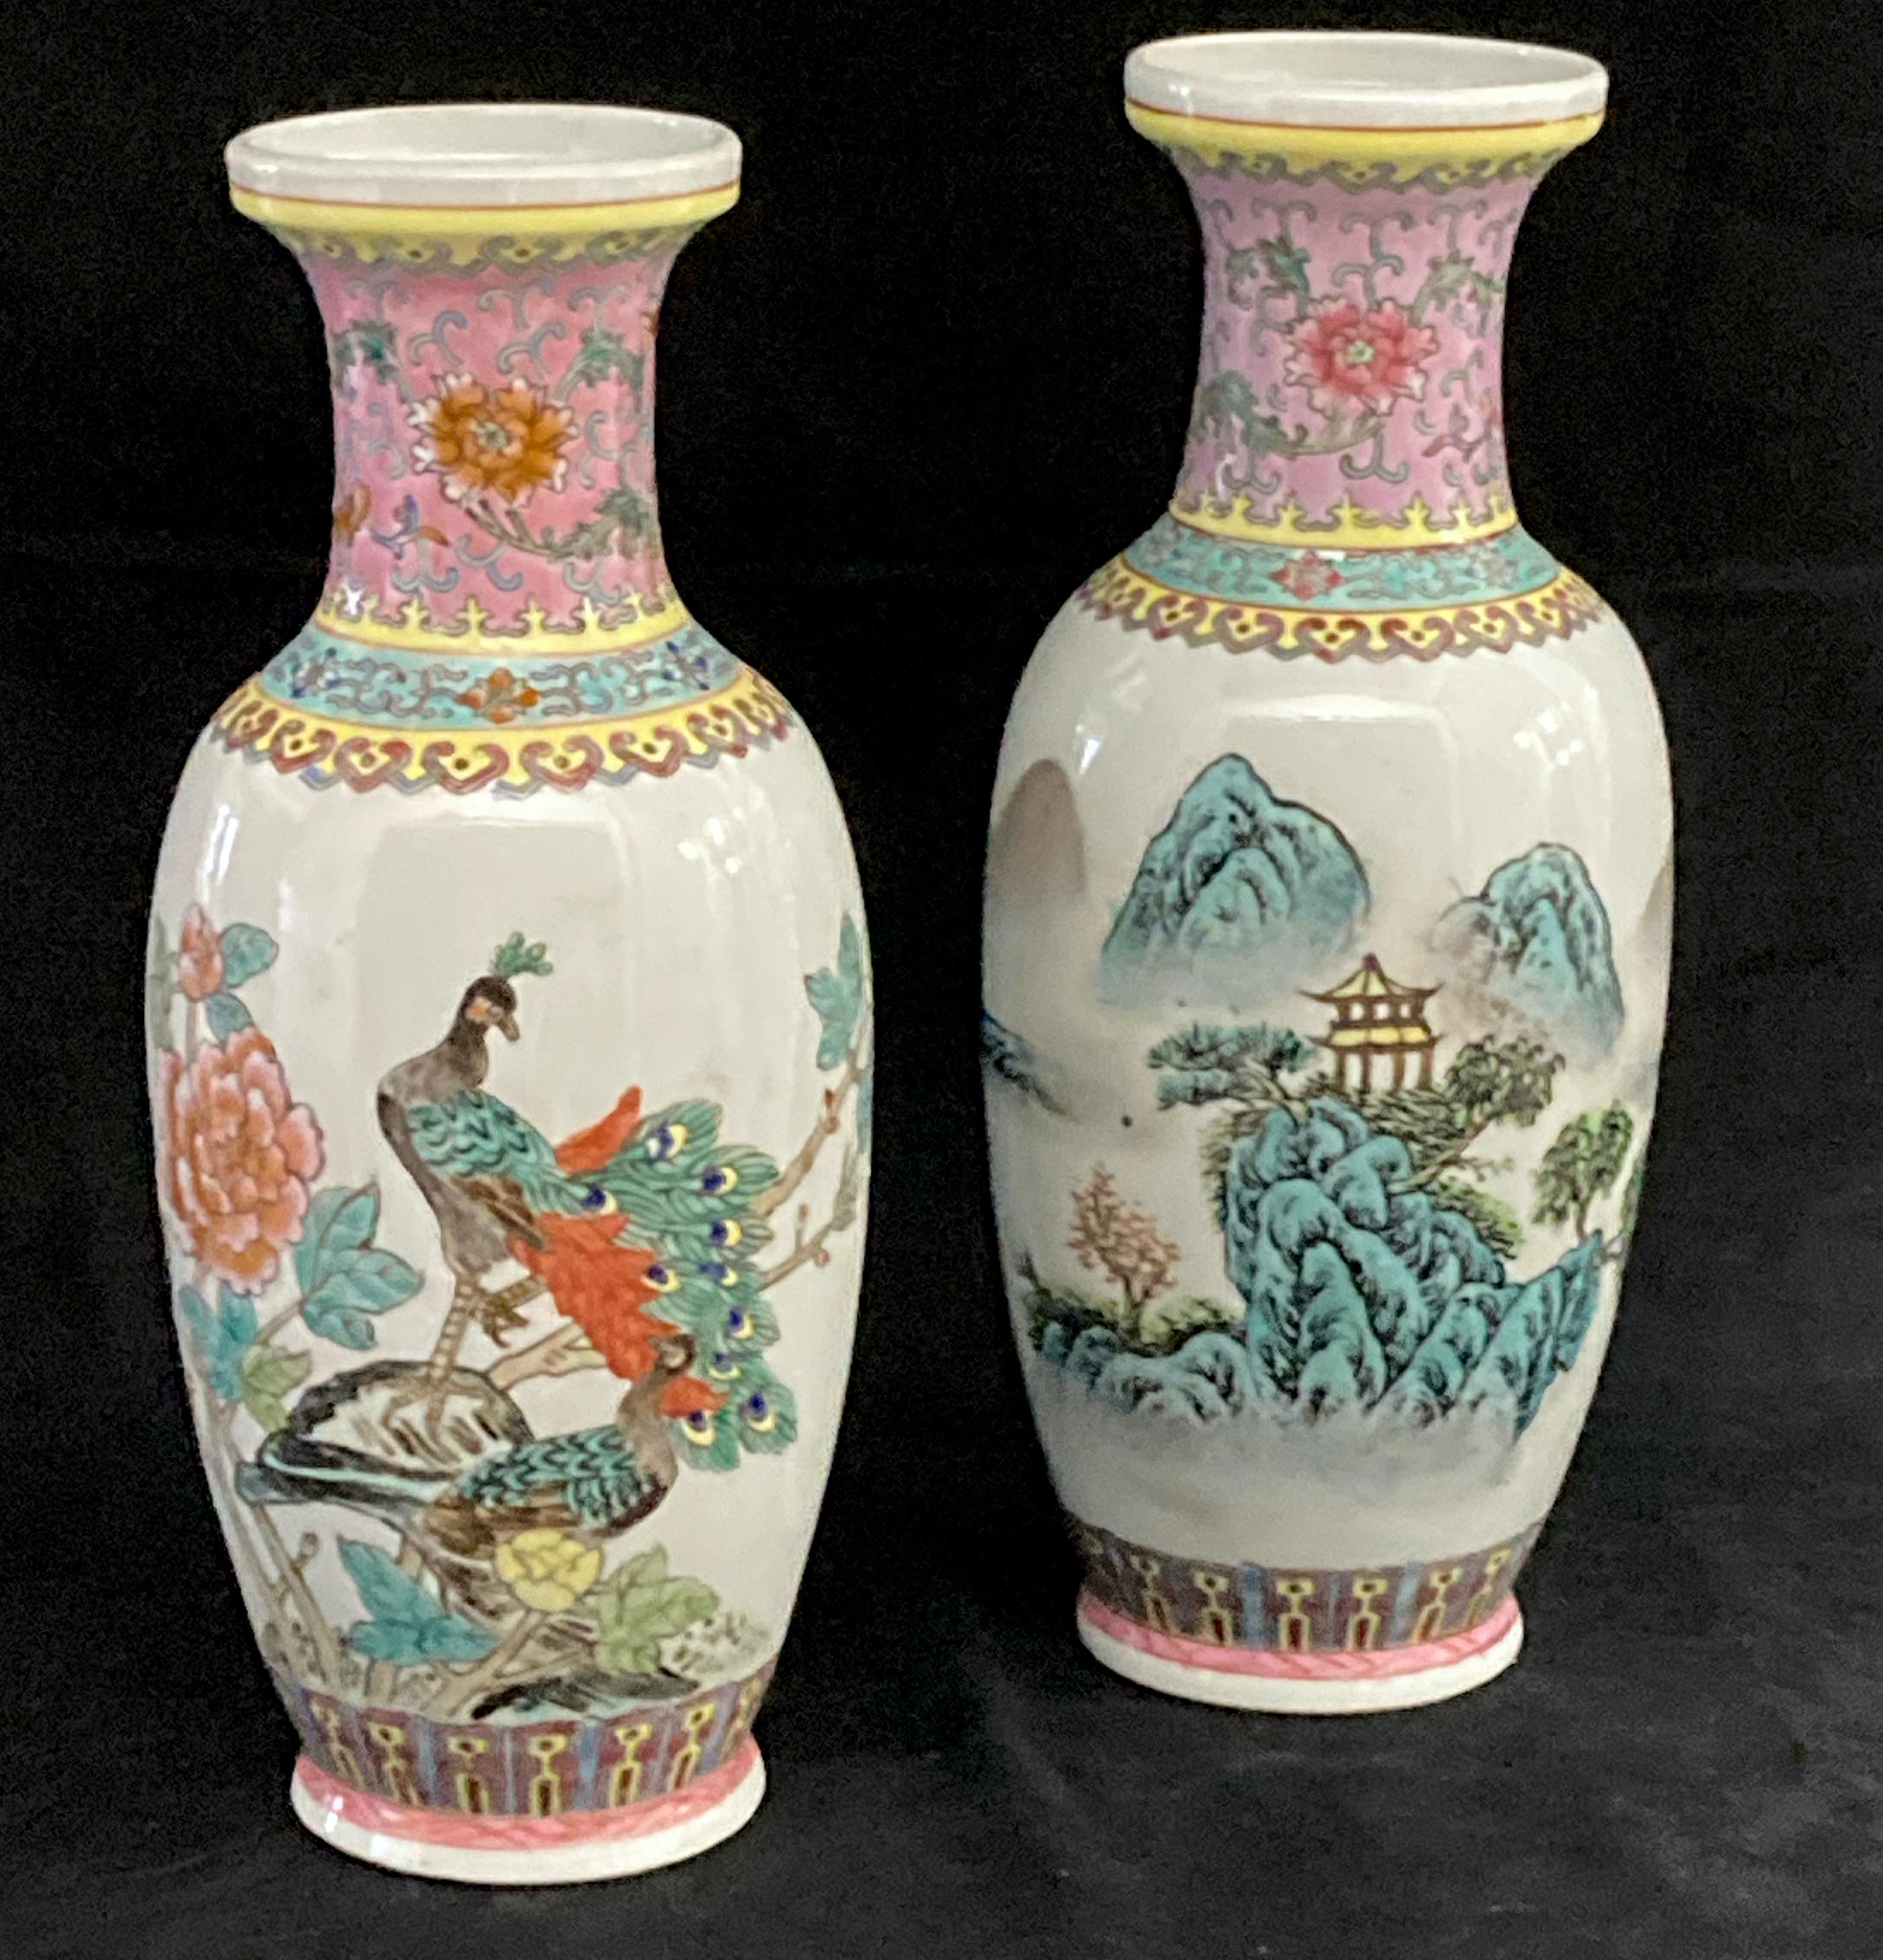 A matched pair of Chinese Famille Rose Jingdezhen vases. One with enamelled decoration in pink and green, depicting a peacock on rockery and peony branch.
The other in the same palette depicting a mountain landscape, possibly near